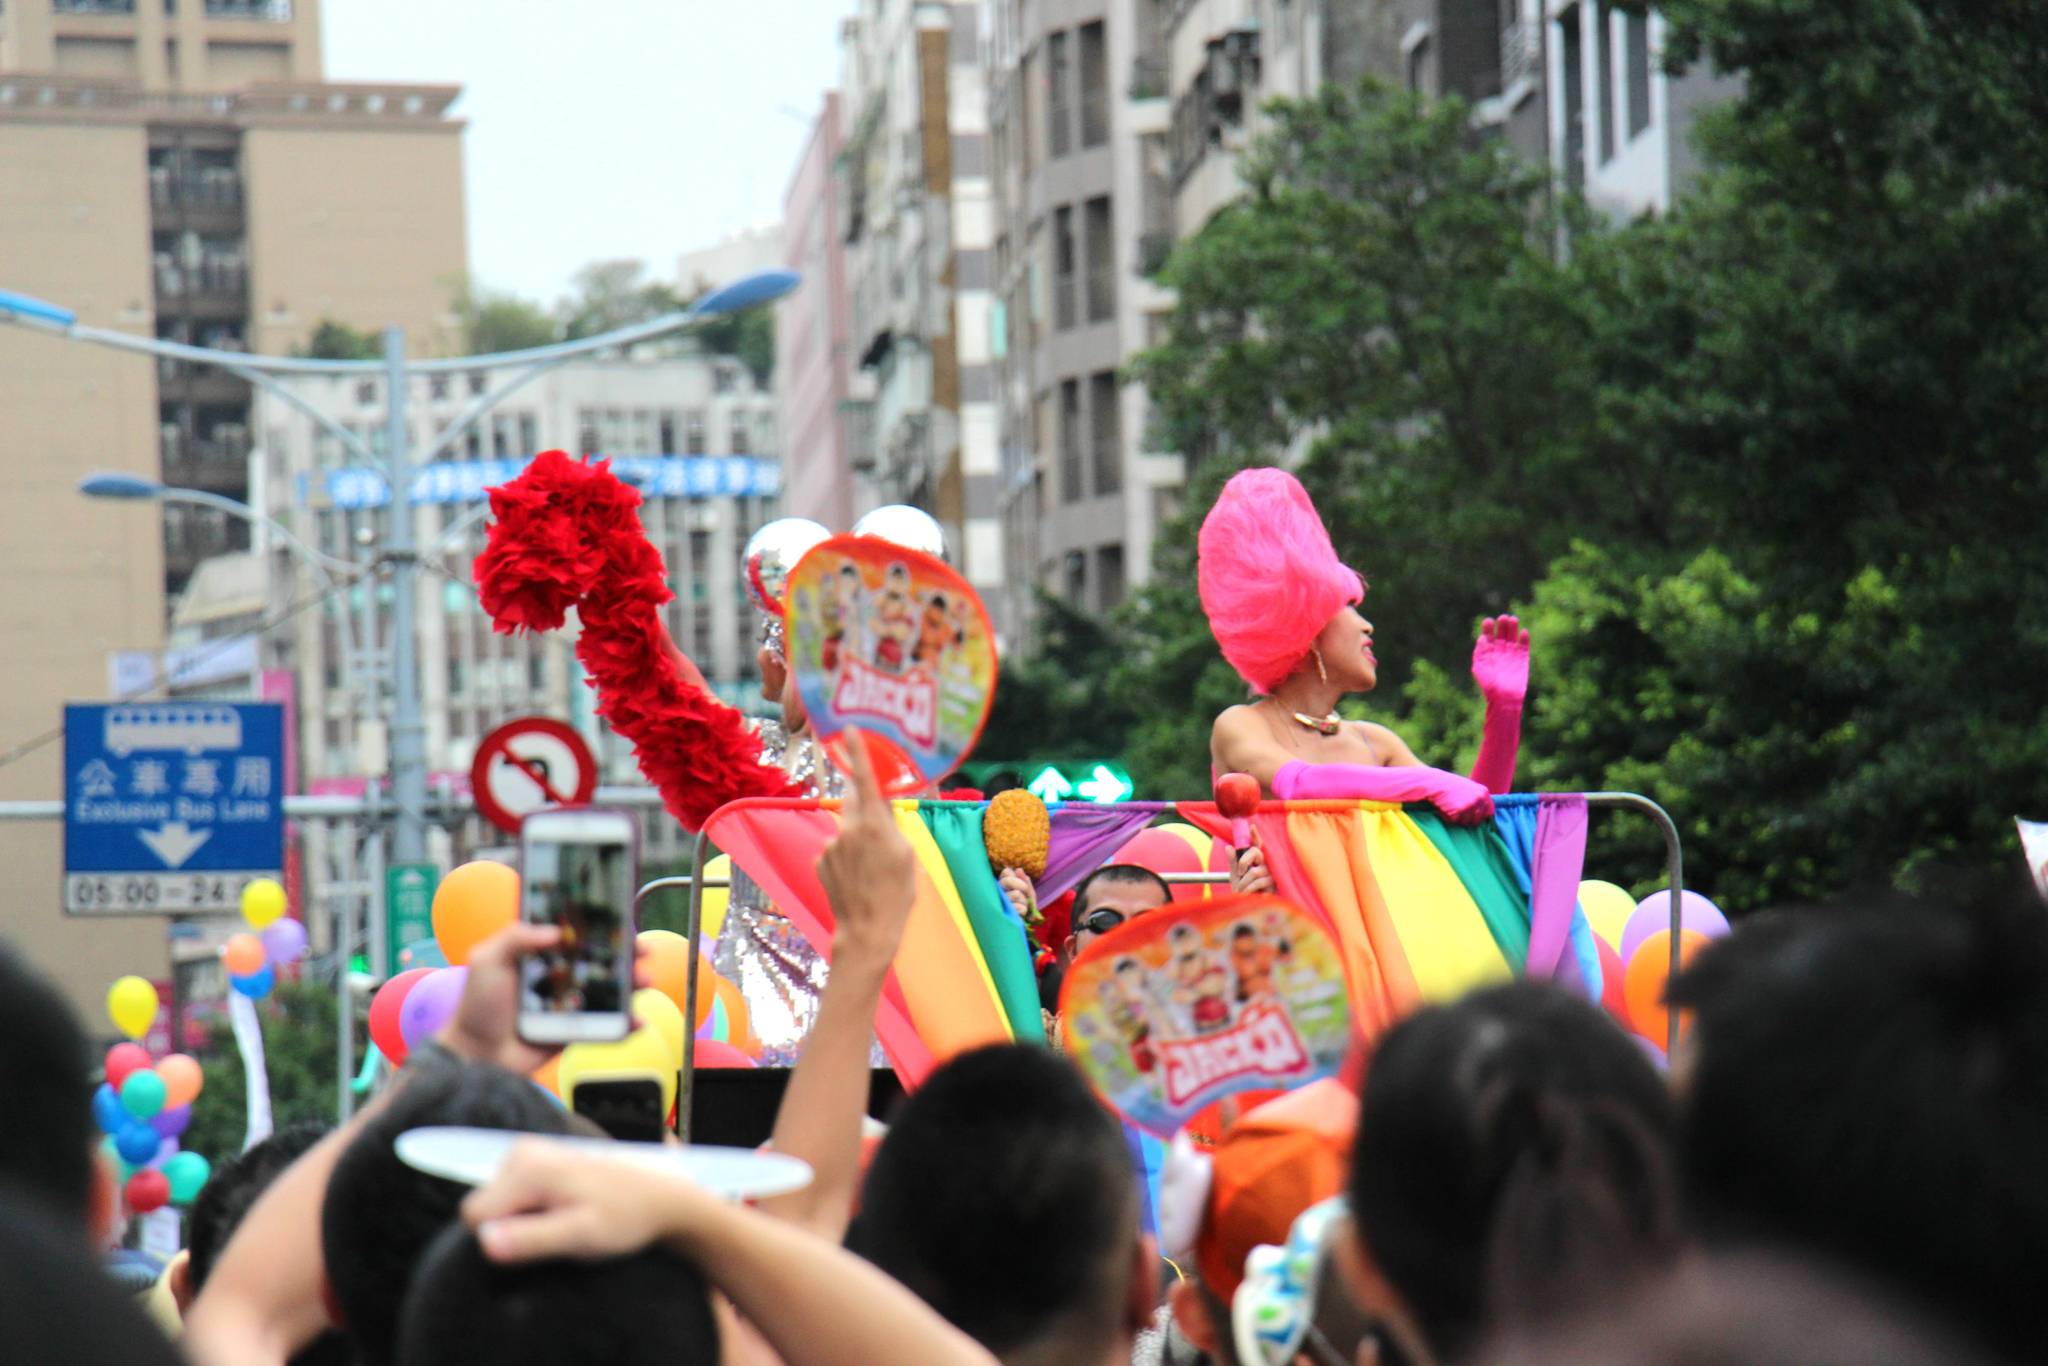 How China‘s LGBT community is growing in clout